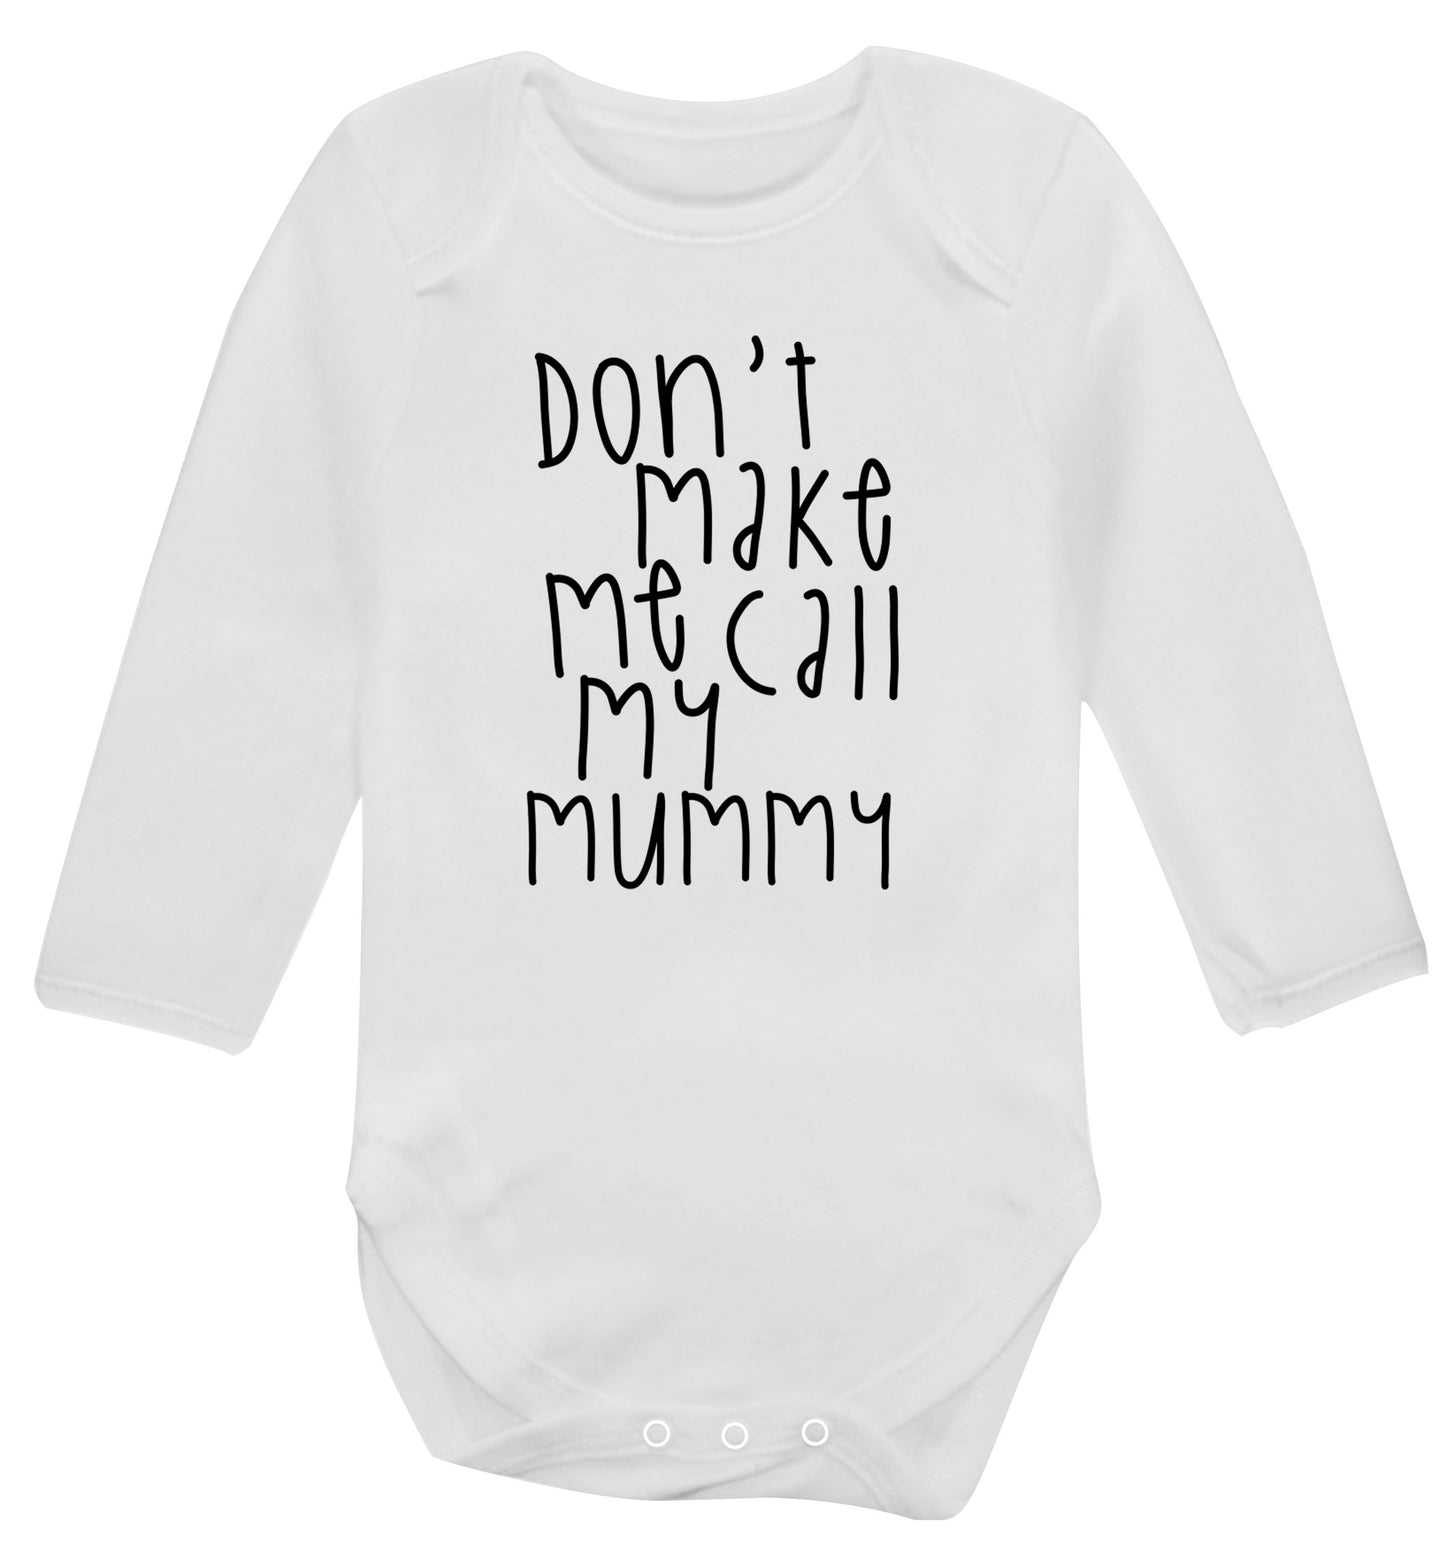 Don't make me call my mummy Baby Vest long sleeved white 6-12 months